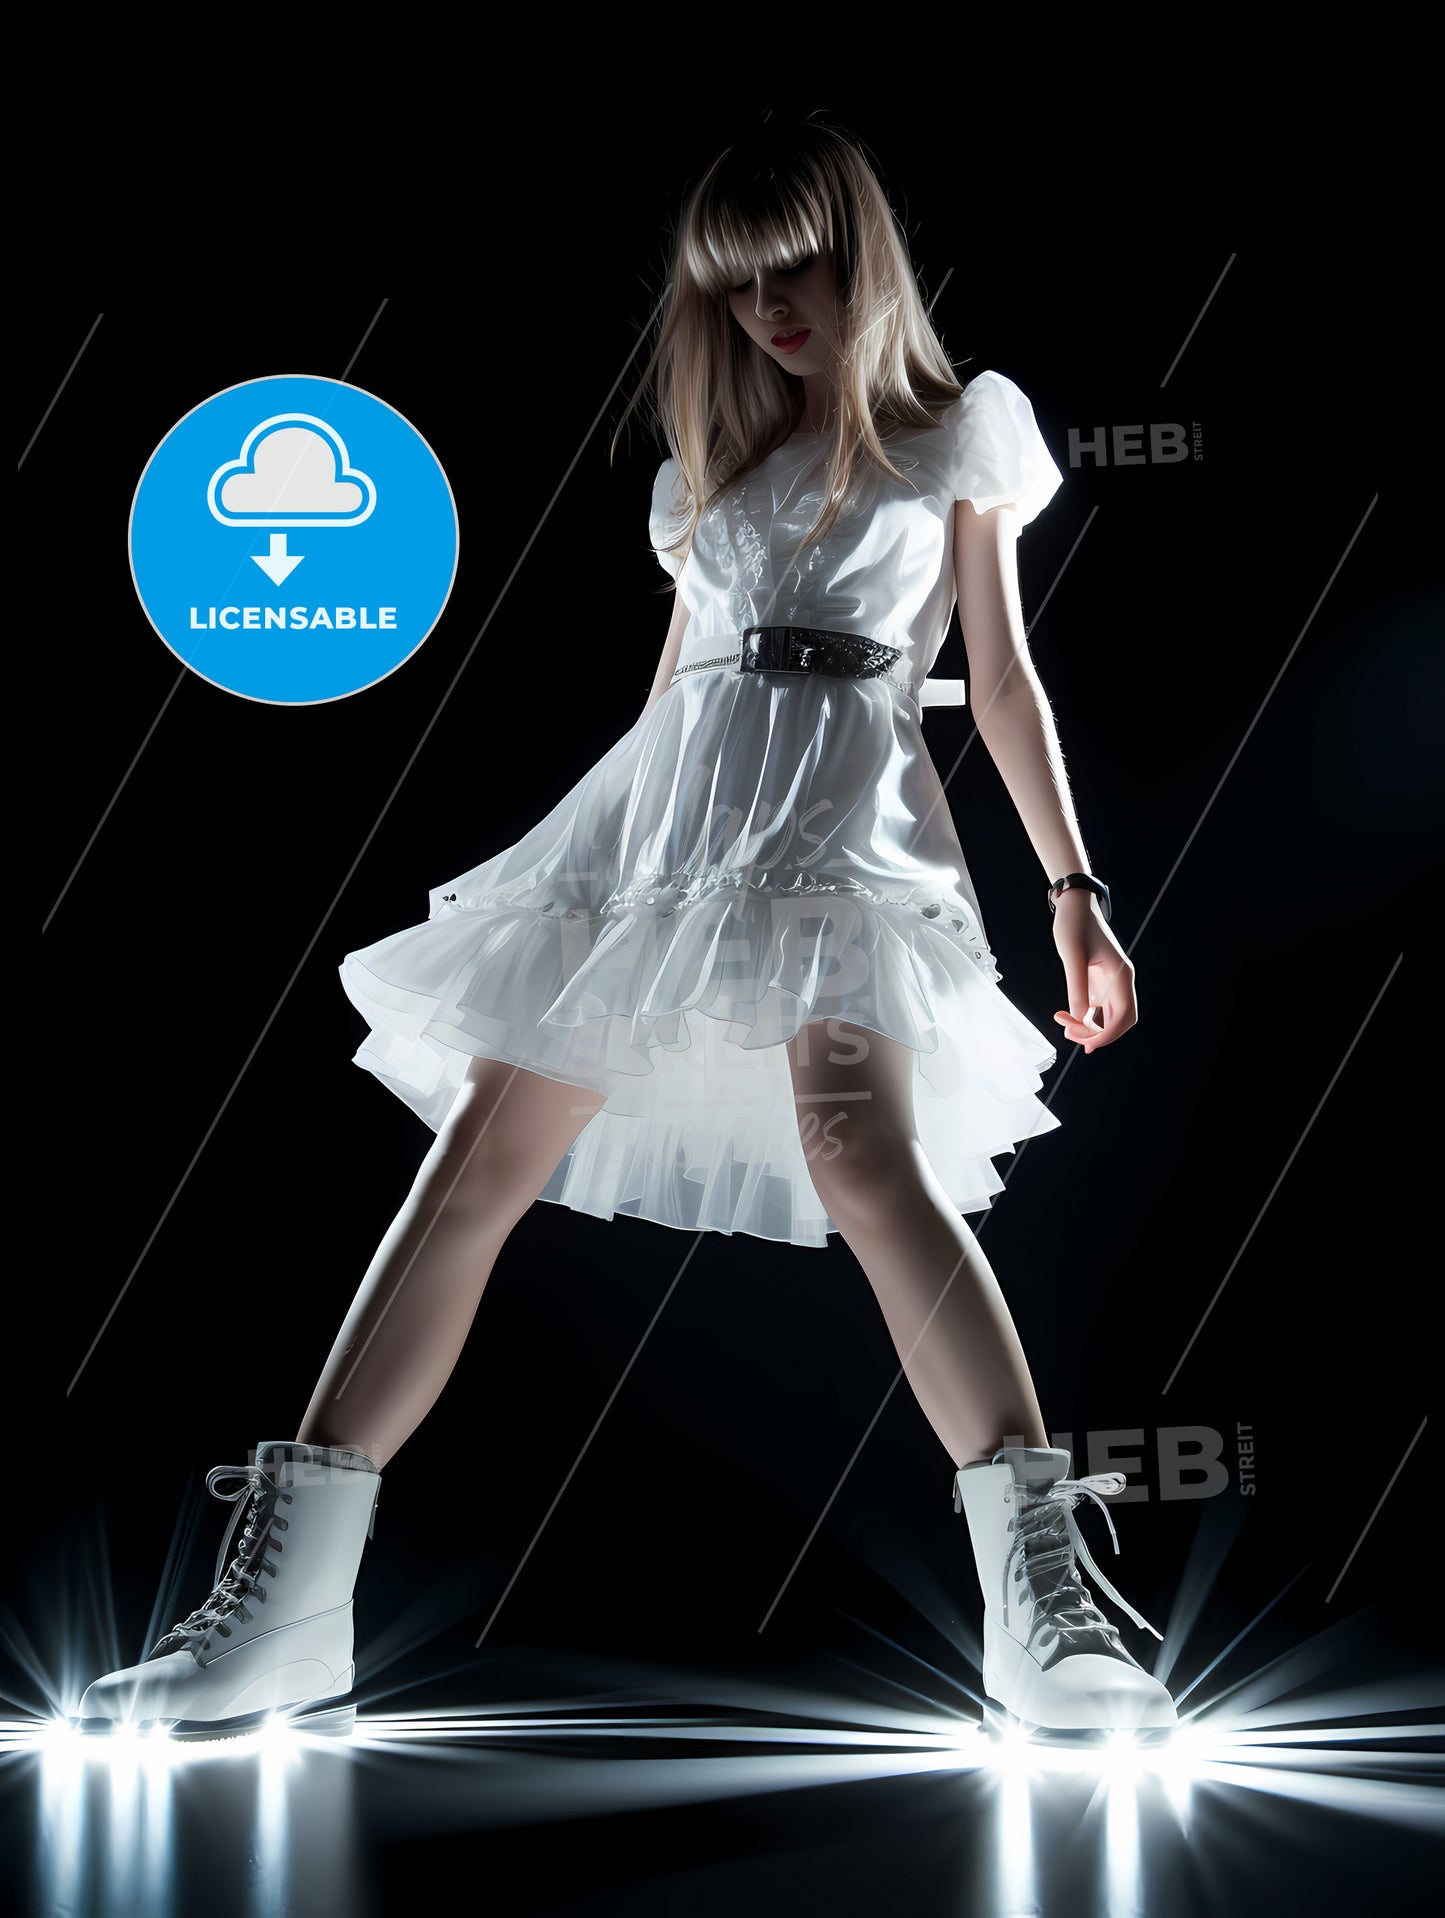 Very Low Angle, A Woman In A White Dress And White Boots